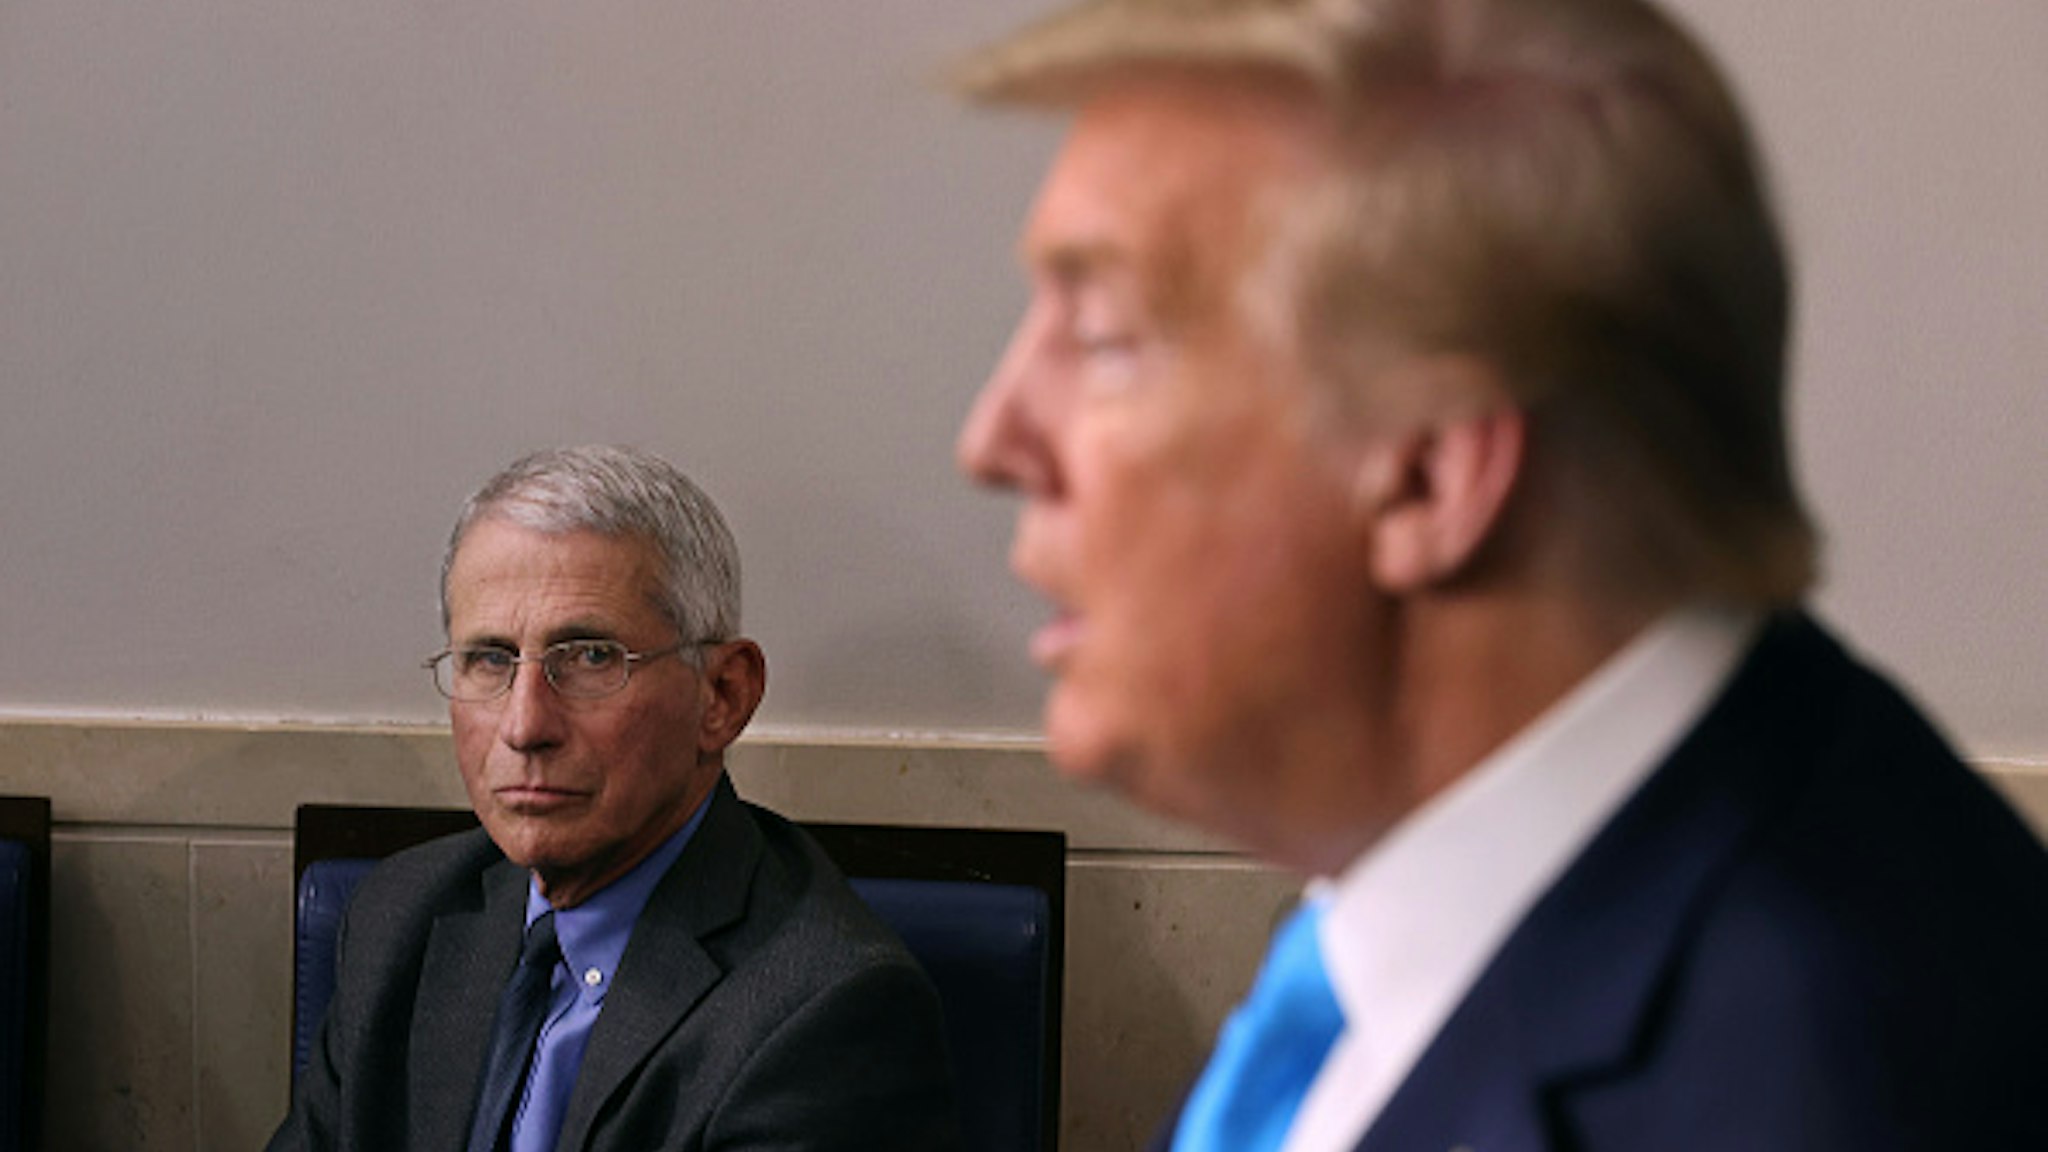 WASHINGTON, DC - APRIL 07: Anthony Fauci, director of the National Institute of Allergy and Infectious Diseases, listens to U.S. President Donald Trump speak to reporters following a meeting of the coronavirus task force in the Brady Press Briefing Room at the White House on April 7, 2020 in Washington, DC. The president today removed the independent chairman of a committee tasked with overseeing the roll out of the $2 trillion coronavirus bailout package.